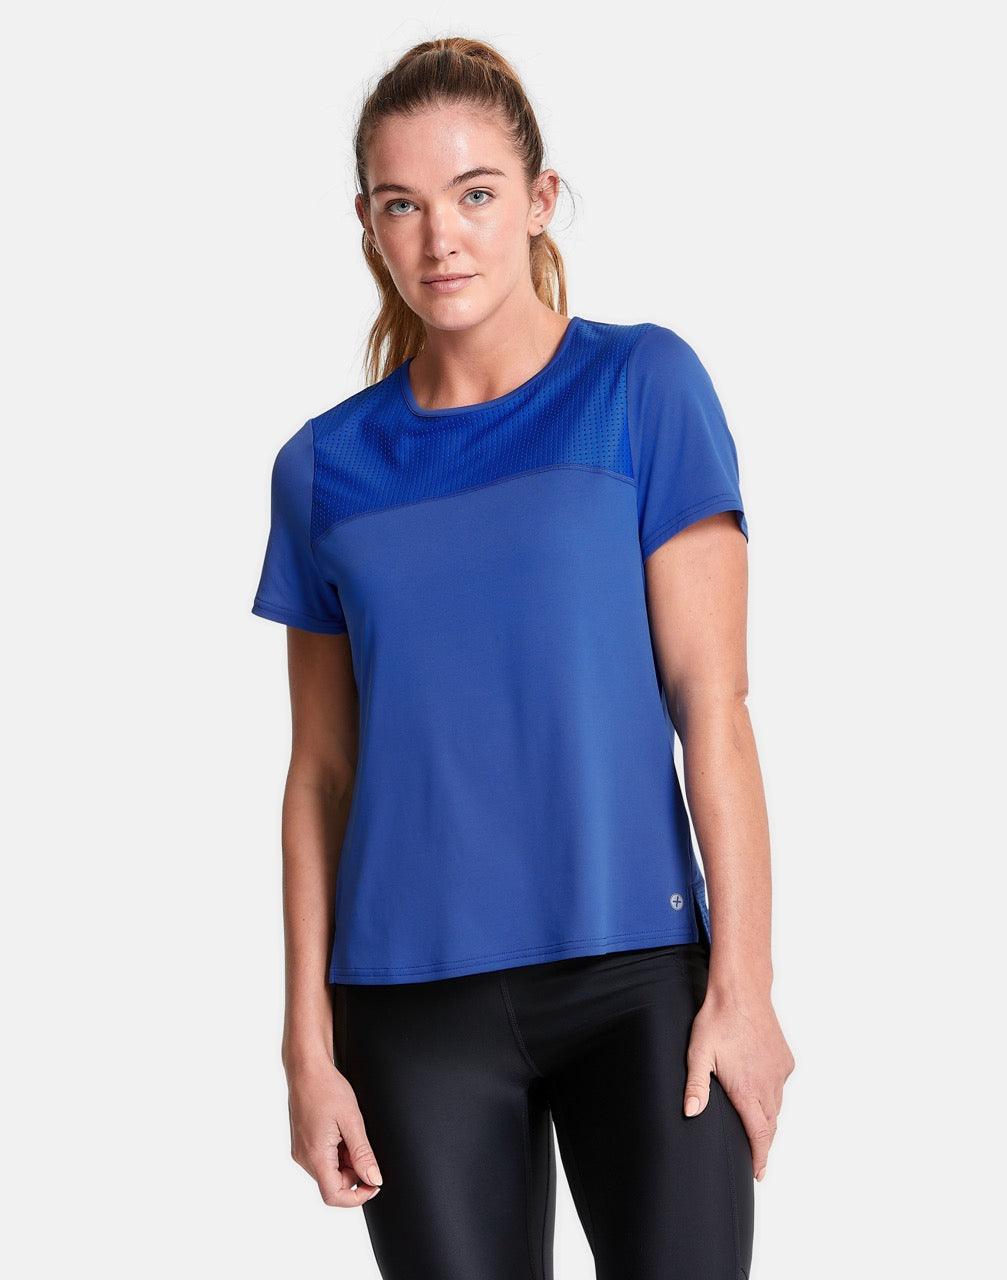 Celero Tee in Earth Blue - T-Shirts - Gym+Coffee IE